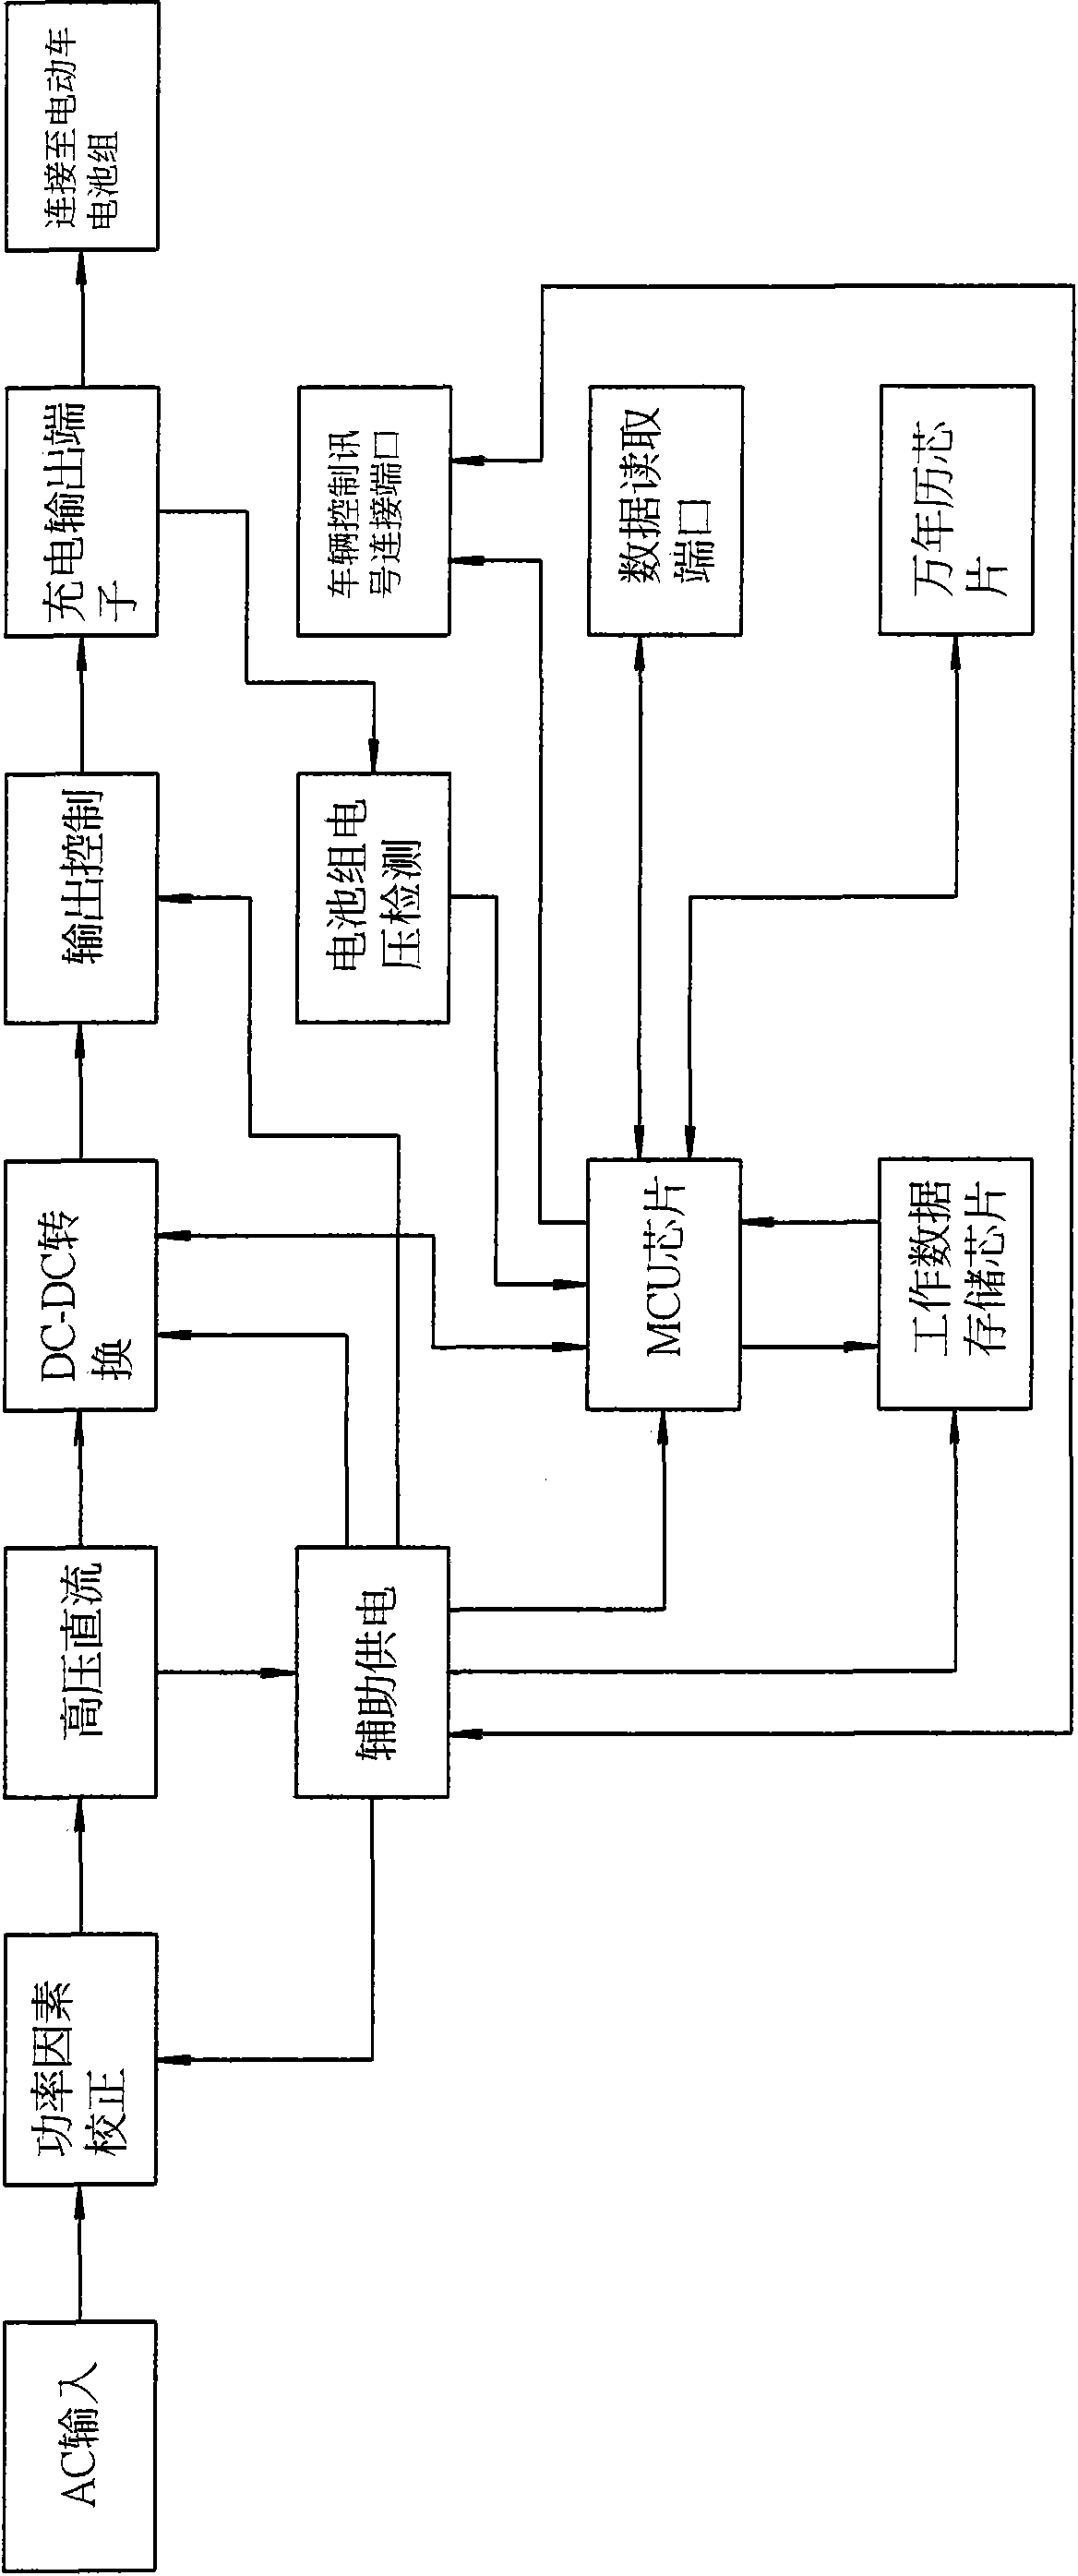 Vehicle-mounted electrical vehicle charger with memory function